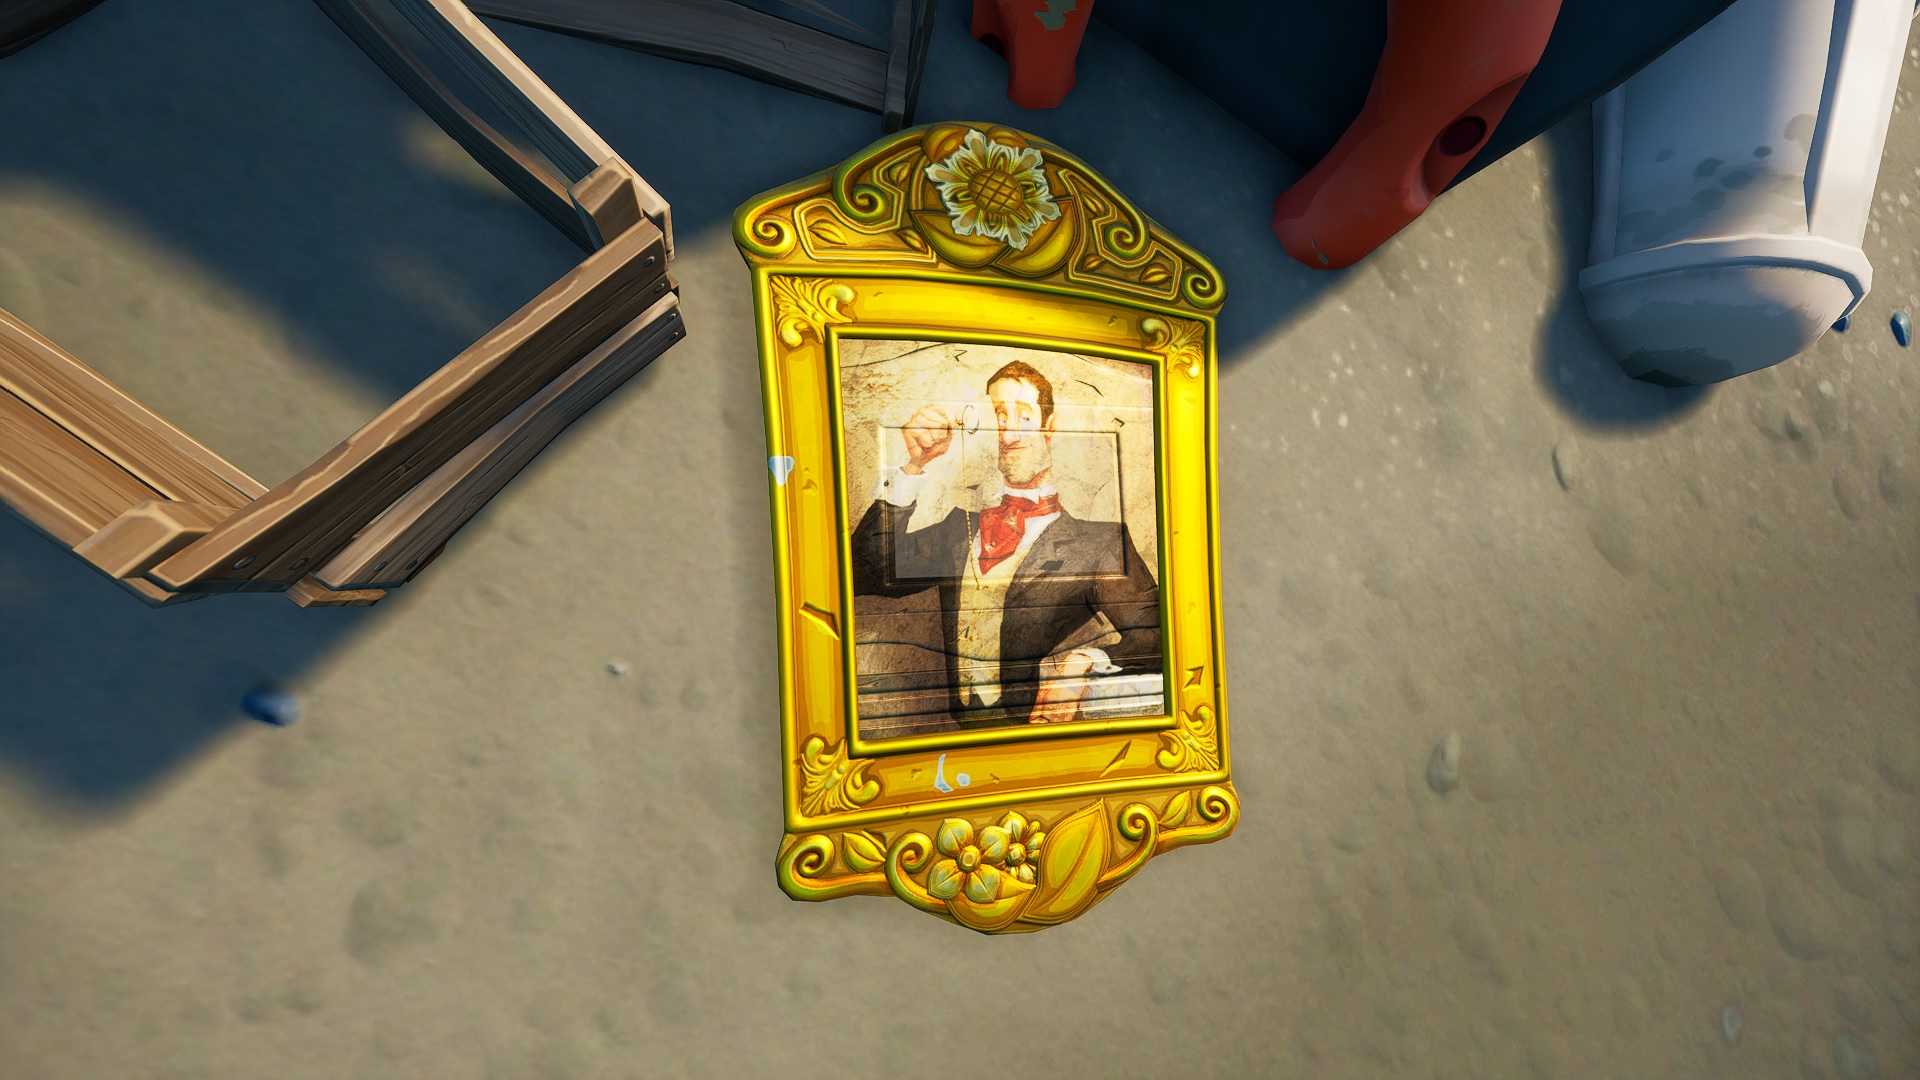  Where to find a family portrait from a shipwreck in Fortnite 